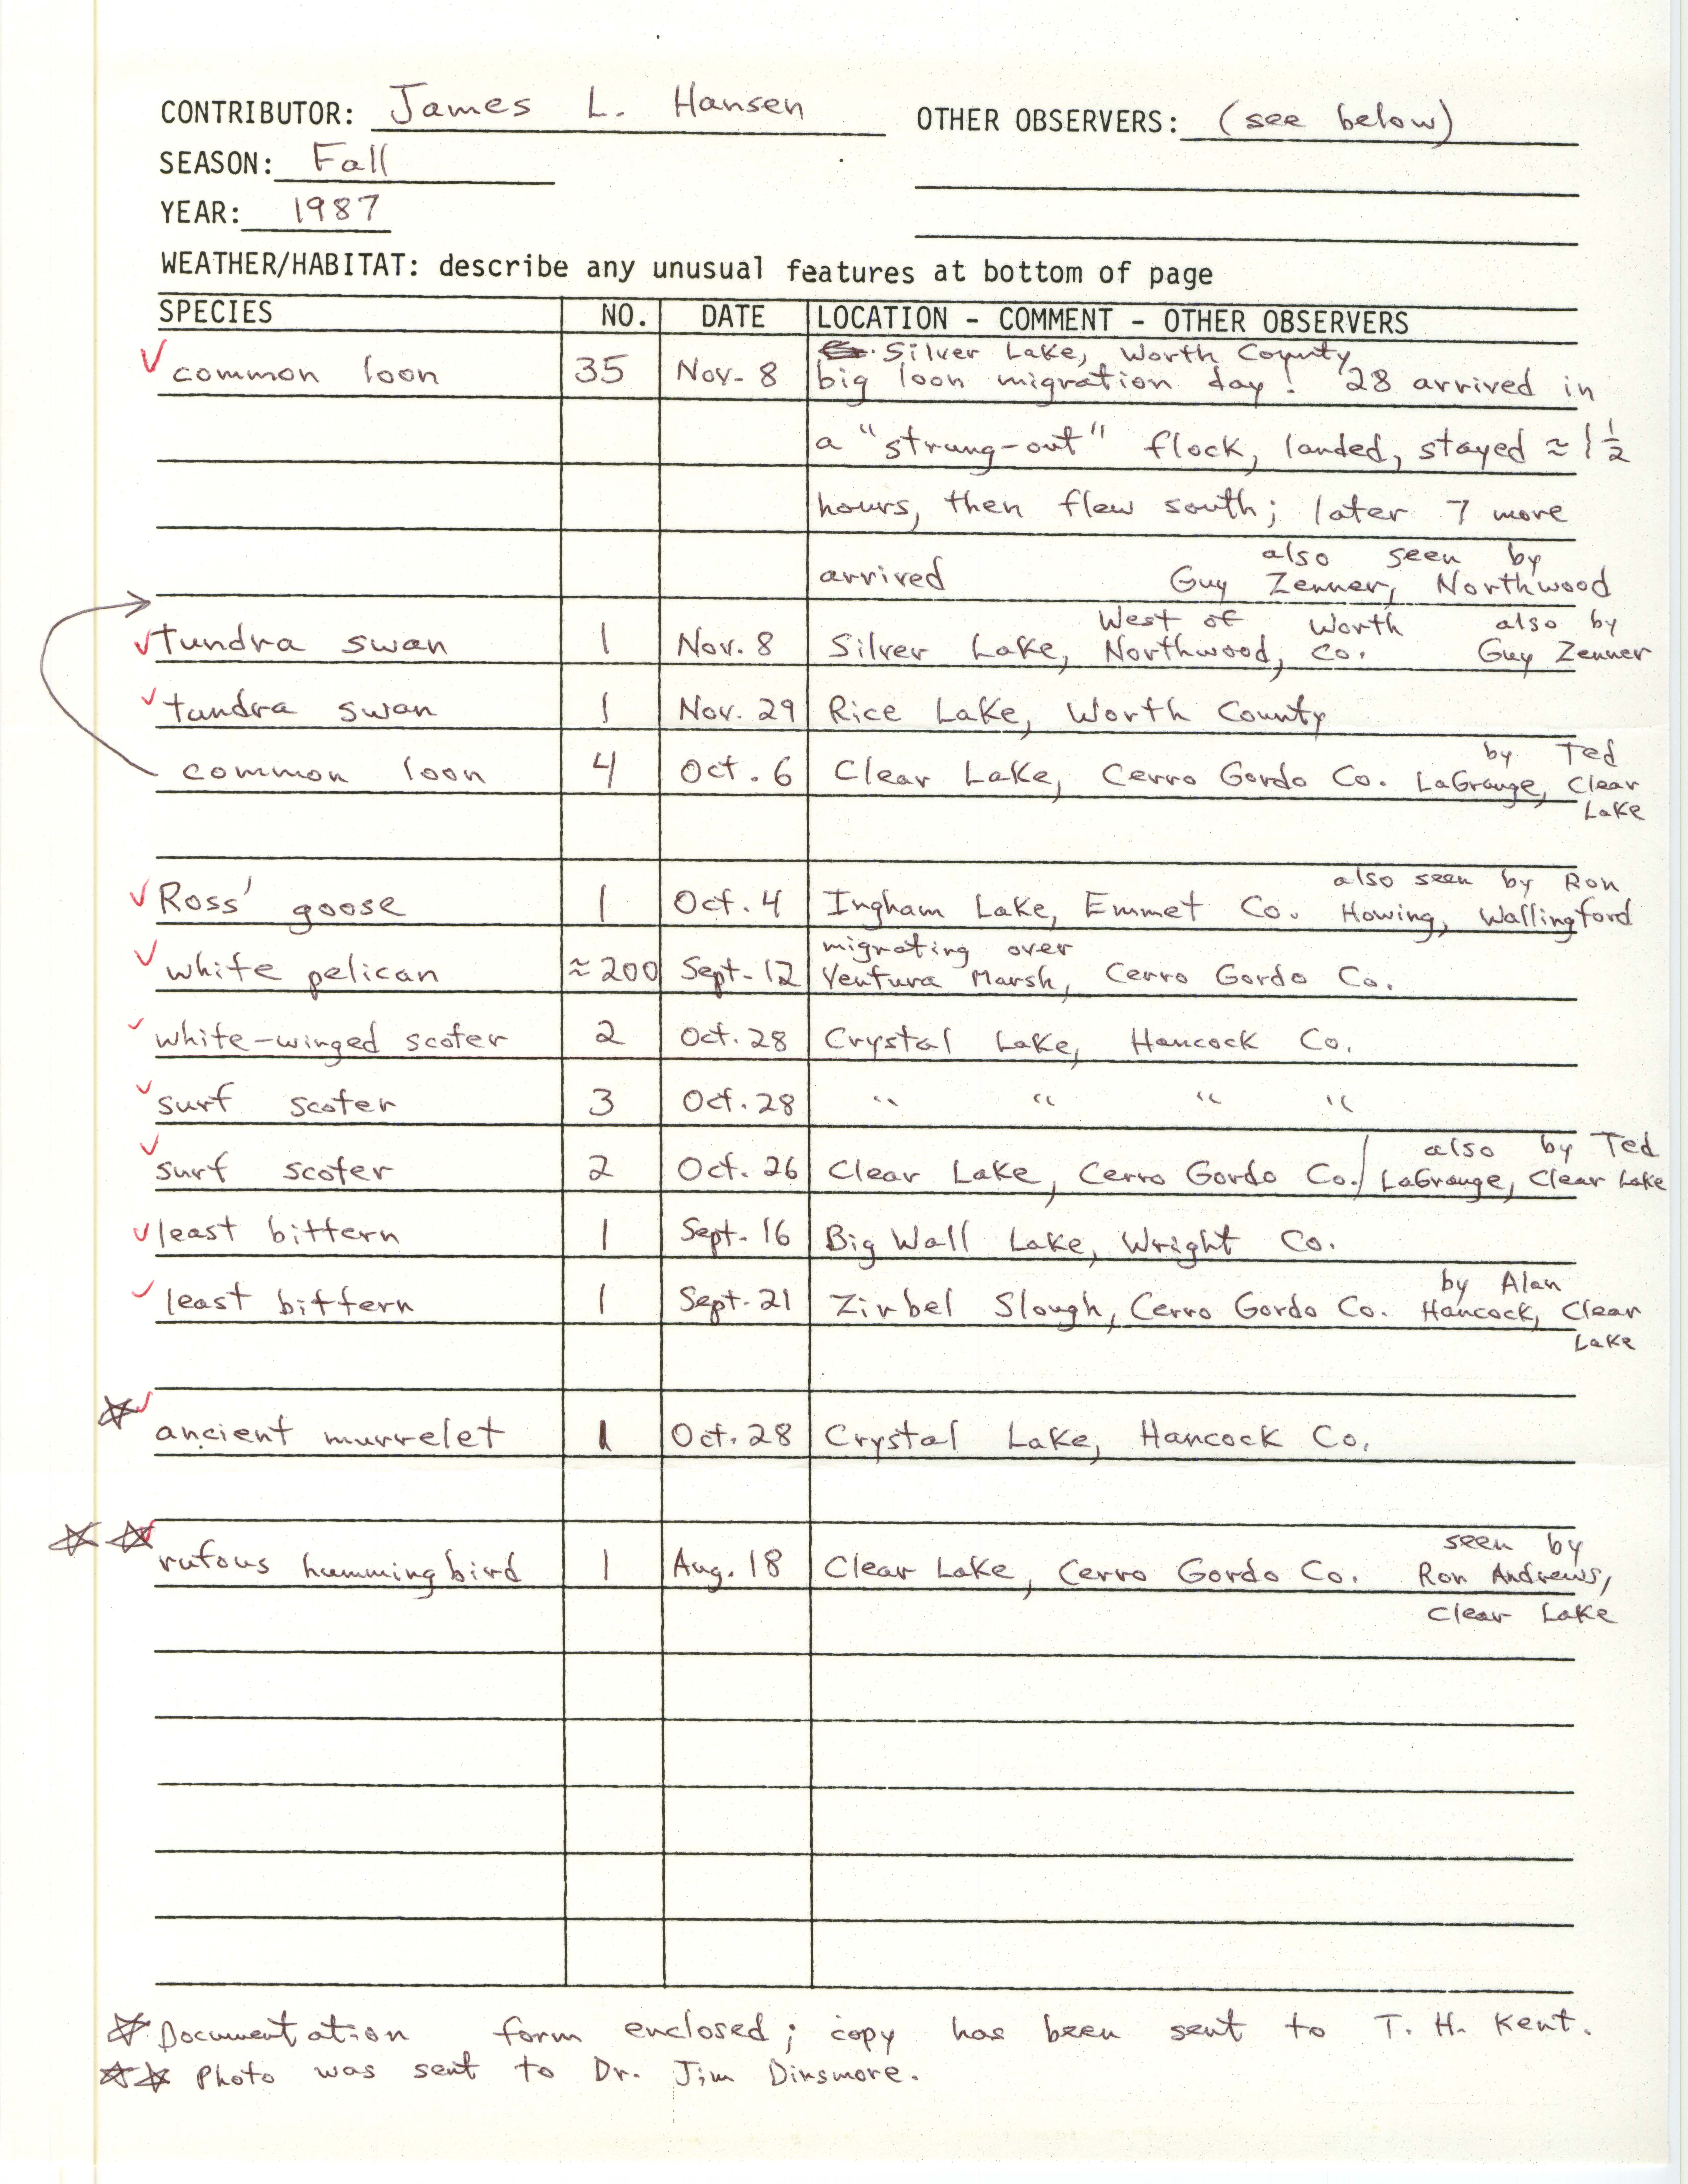 Field notes contributed by James L. Hansen, fall 1987